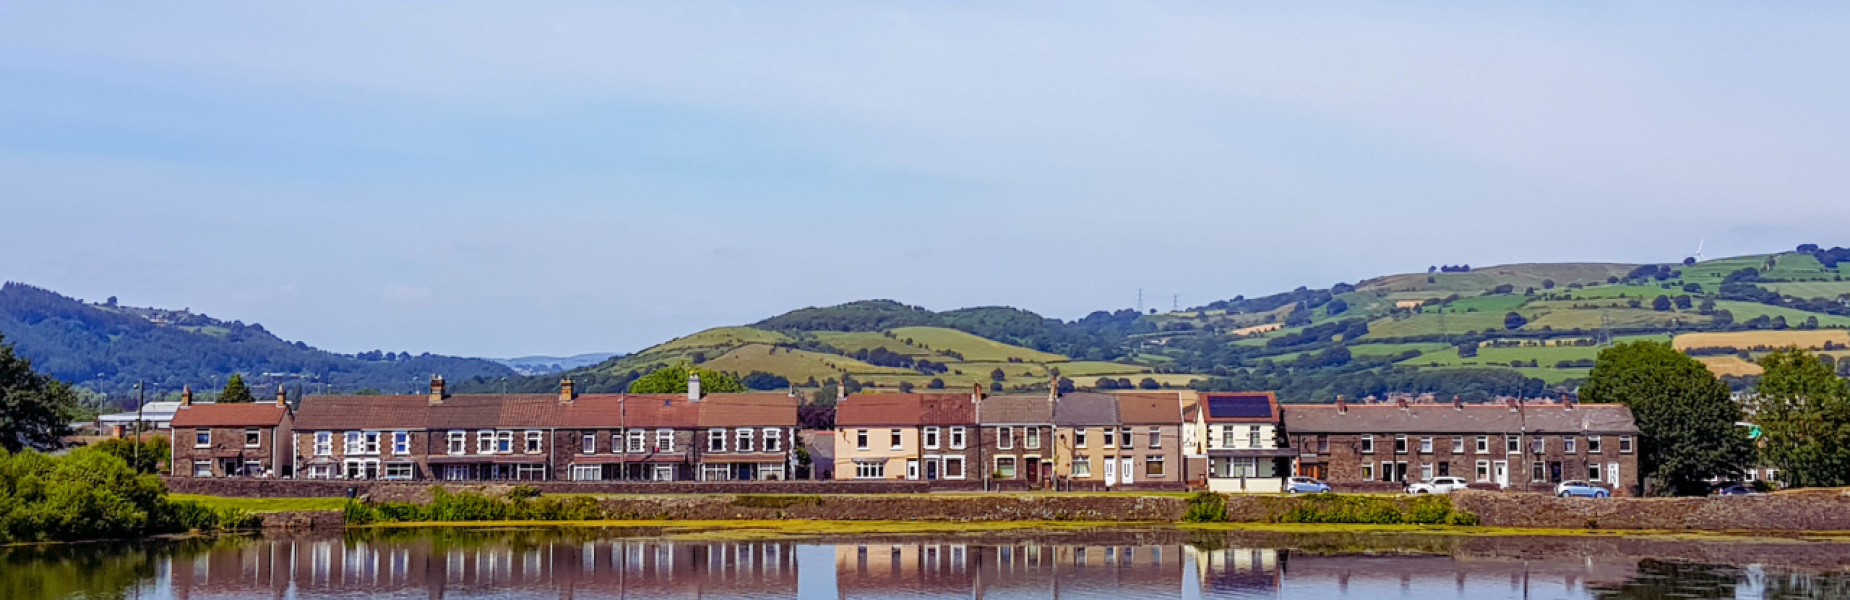 Row of houses in Caerphilly town